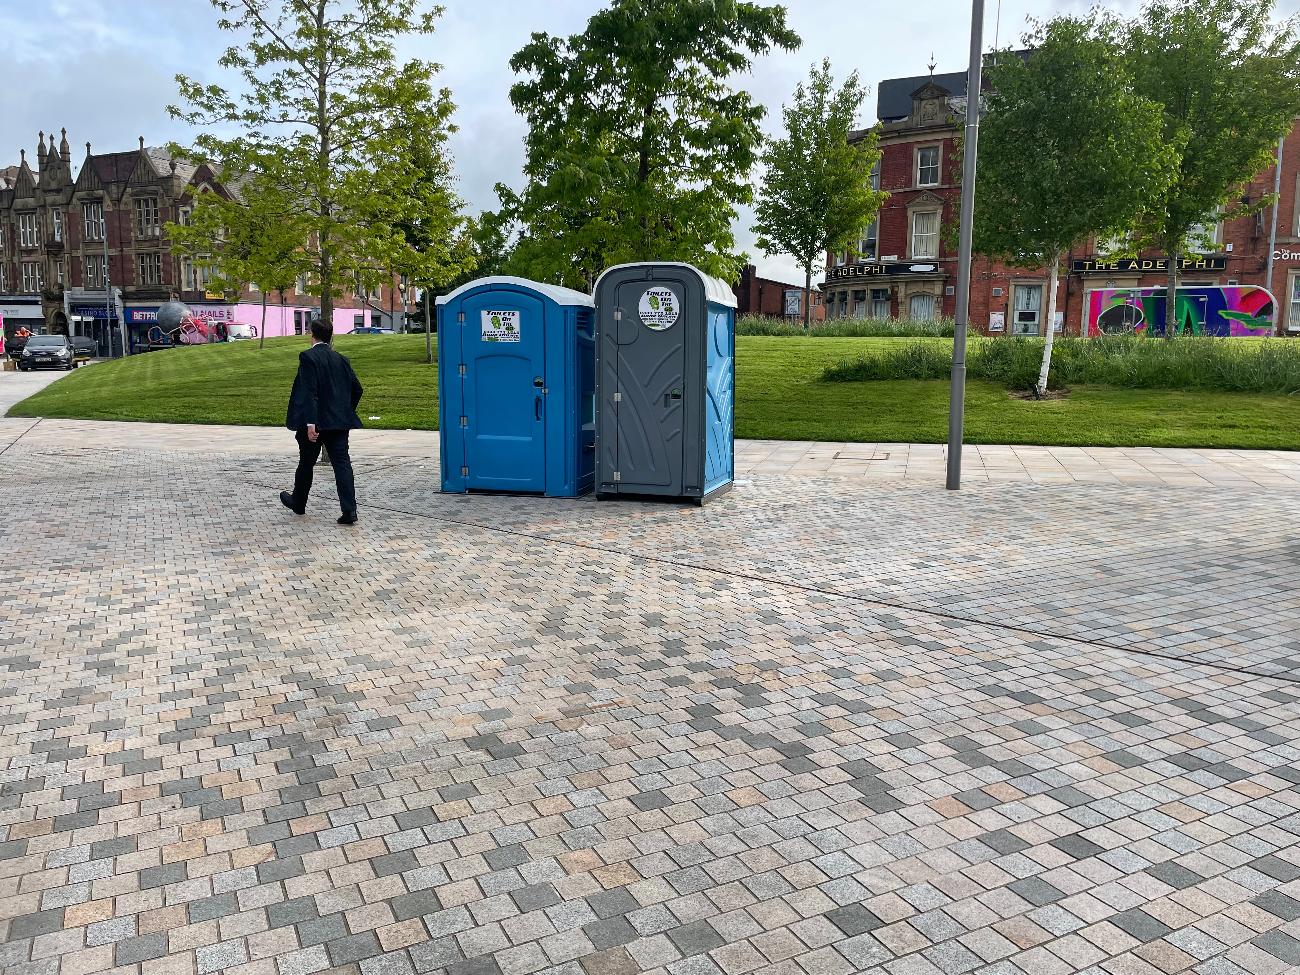 Gallery | Portable Toilet Loo Hire Rental Company in North West uk and Manchester gallery image 12